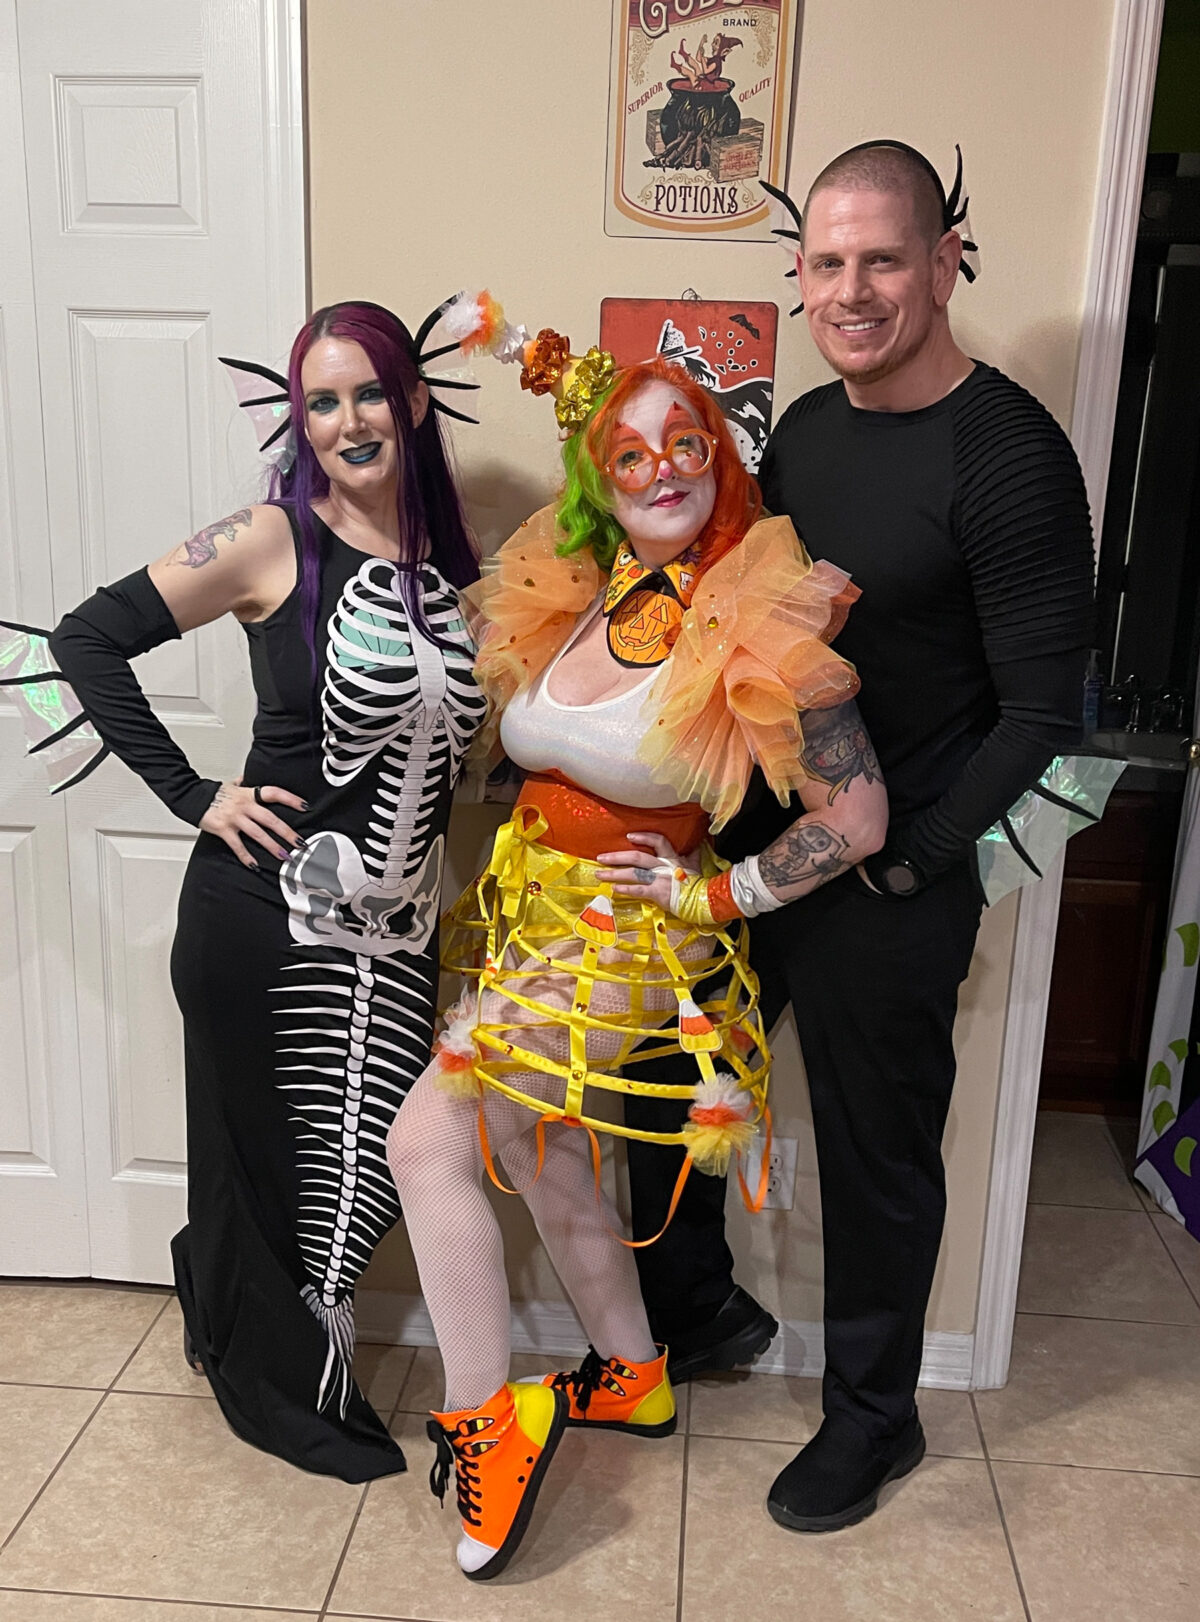 Cordelia and Dave are dressed as skeleton mermaids and Carlye is dressed as a candy corn clown in between them